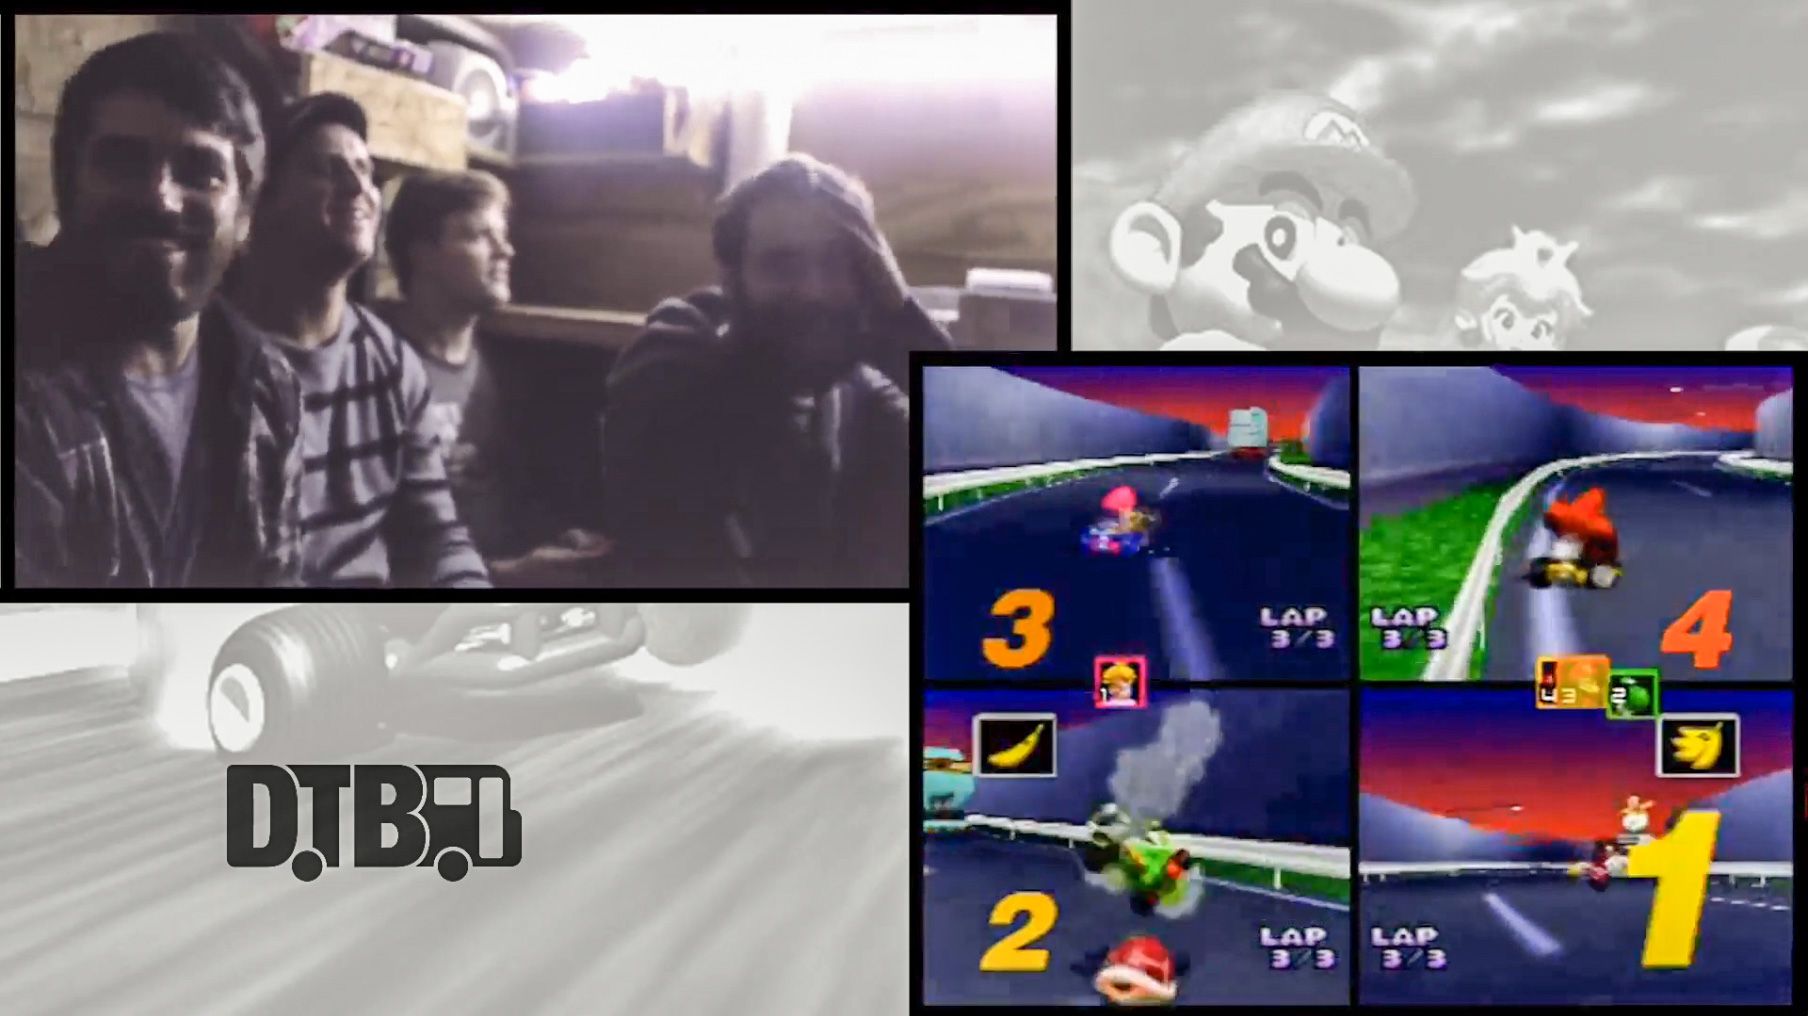 Wolves At The Gate Vs. The Ongoing Concept in Mario Kart 64 – VIDEO GAMES ON TOUR Ep. 2 [VIDEO]